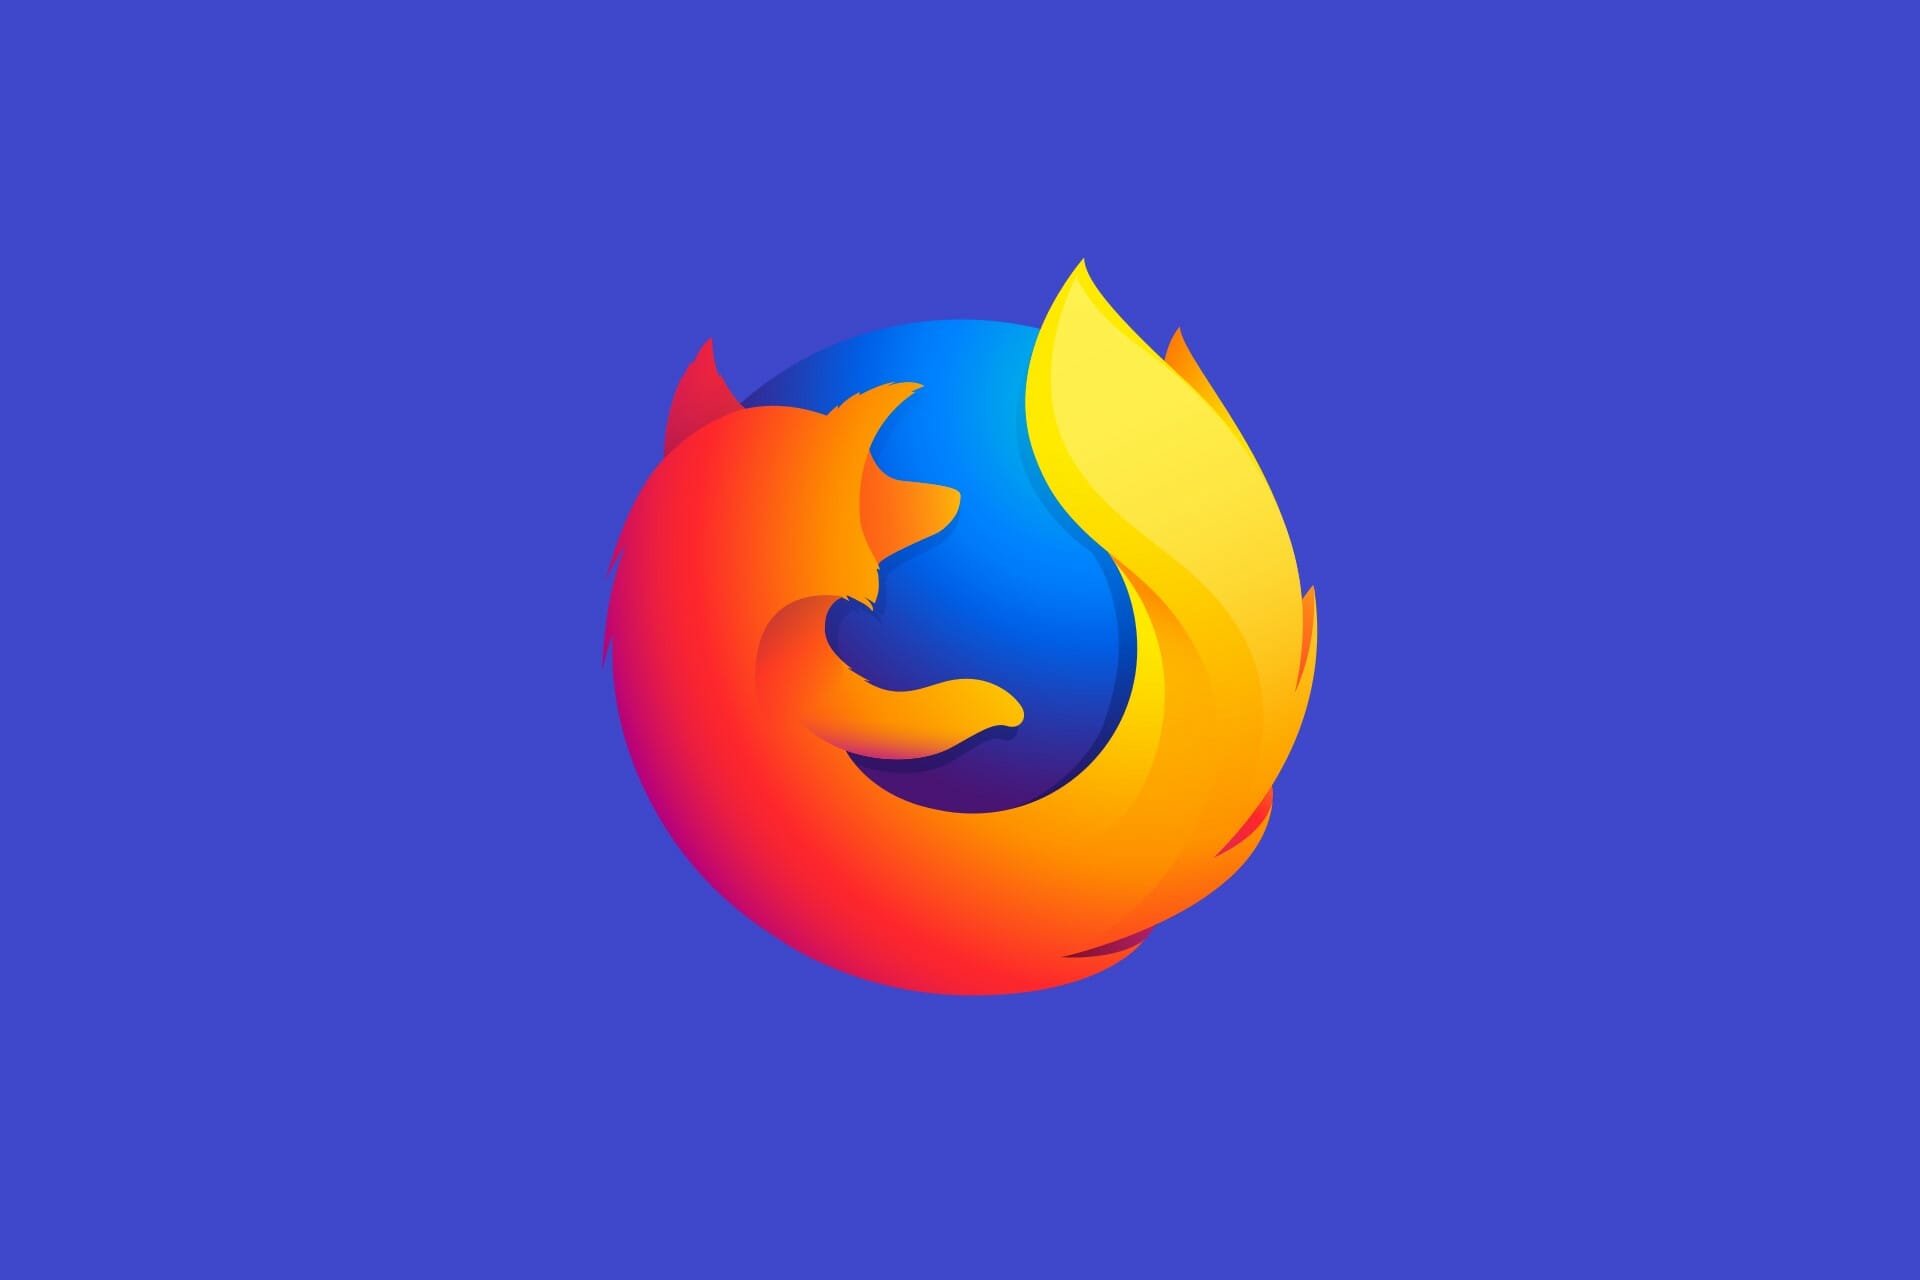 Fix Firefox's JSON viewer or use add-ons and web tools